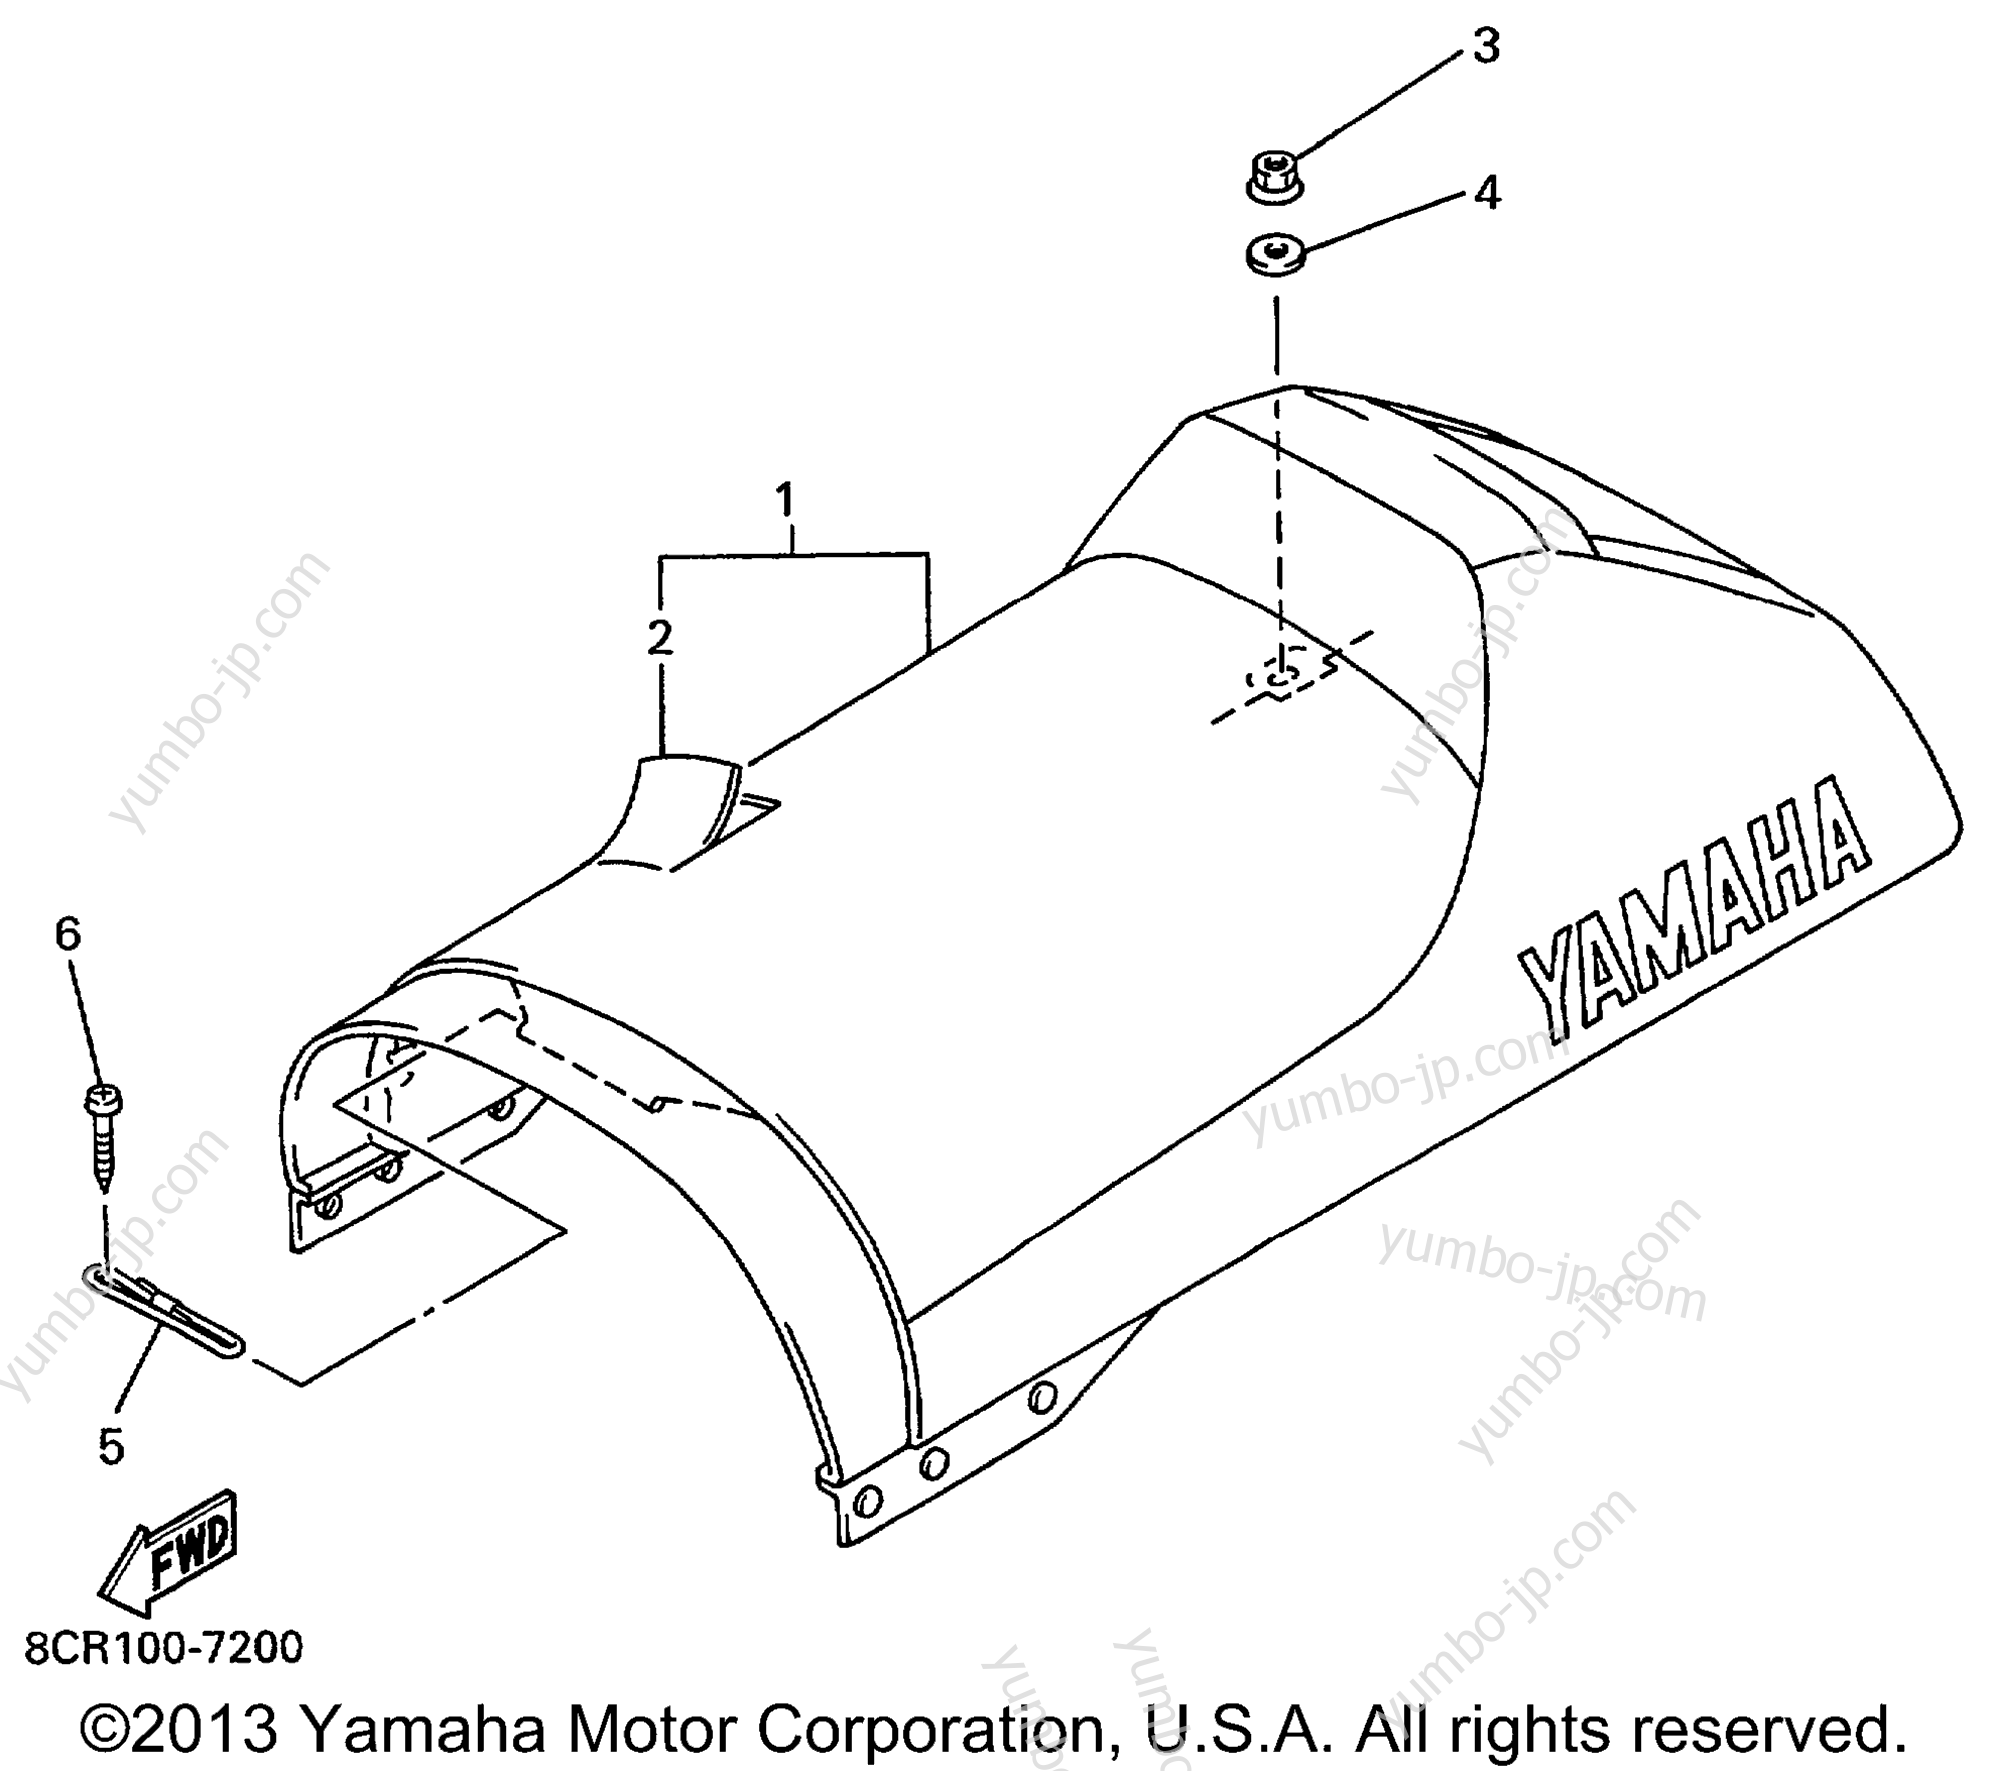 SEAT for snowmobiles YAMAHA VMAX 600 DELUXE (ELEC START) (VX600ERC) 1999 year